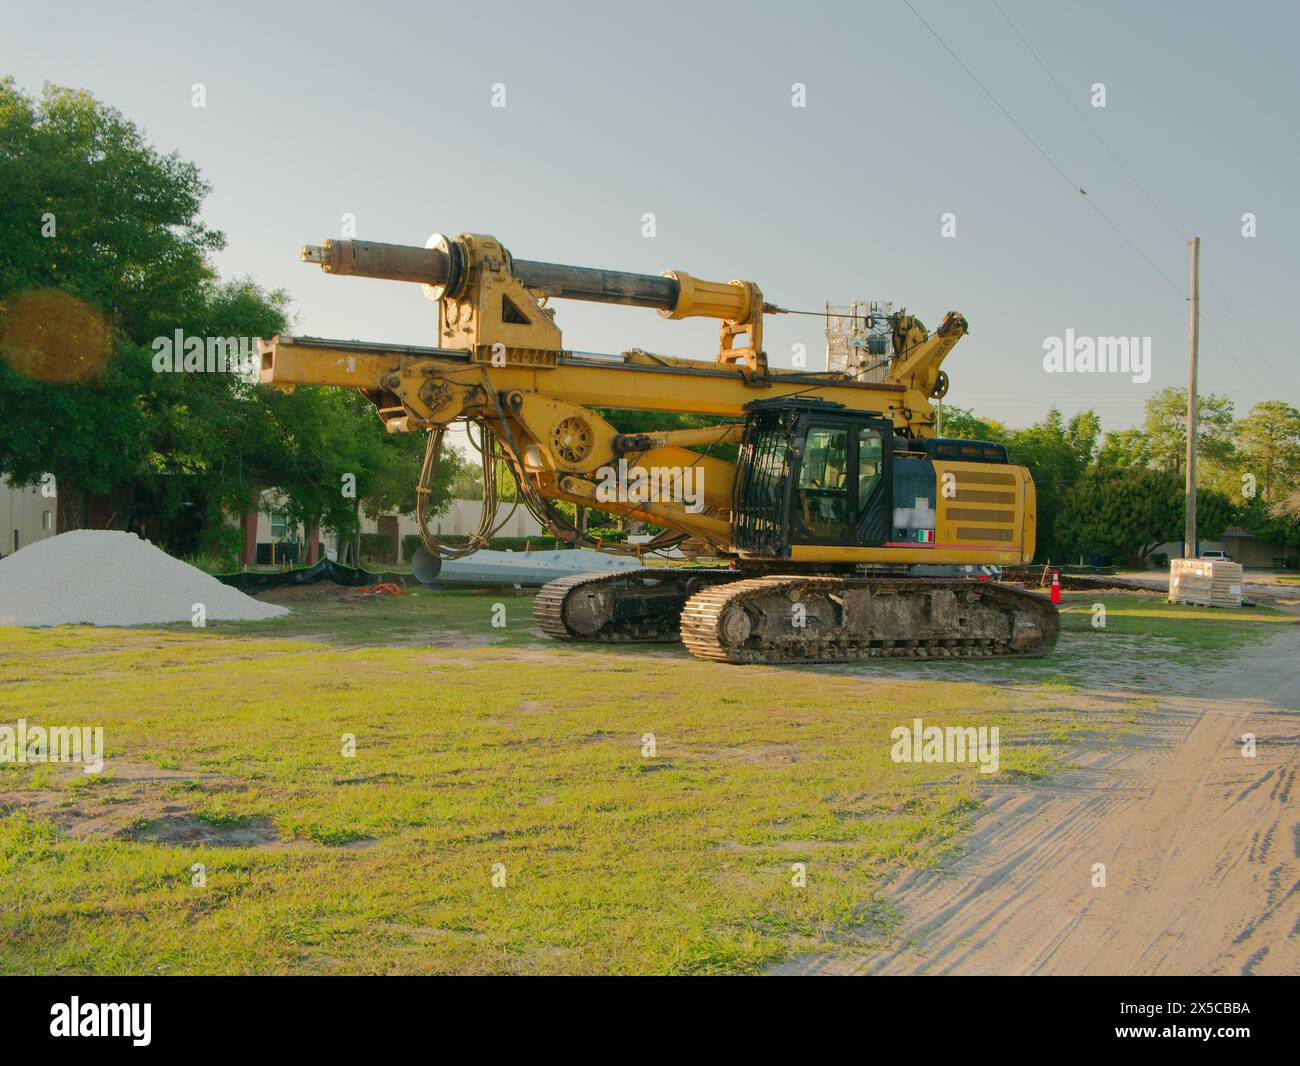 Wide view of a large yellow ROTARY DRILLING RIG in grass and dirt with a pile of small white stones on the left and steel utility poles sections. Stock Photo